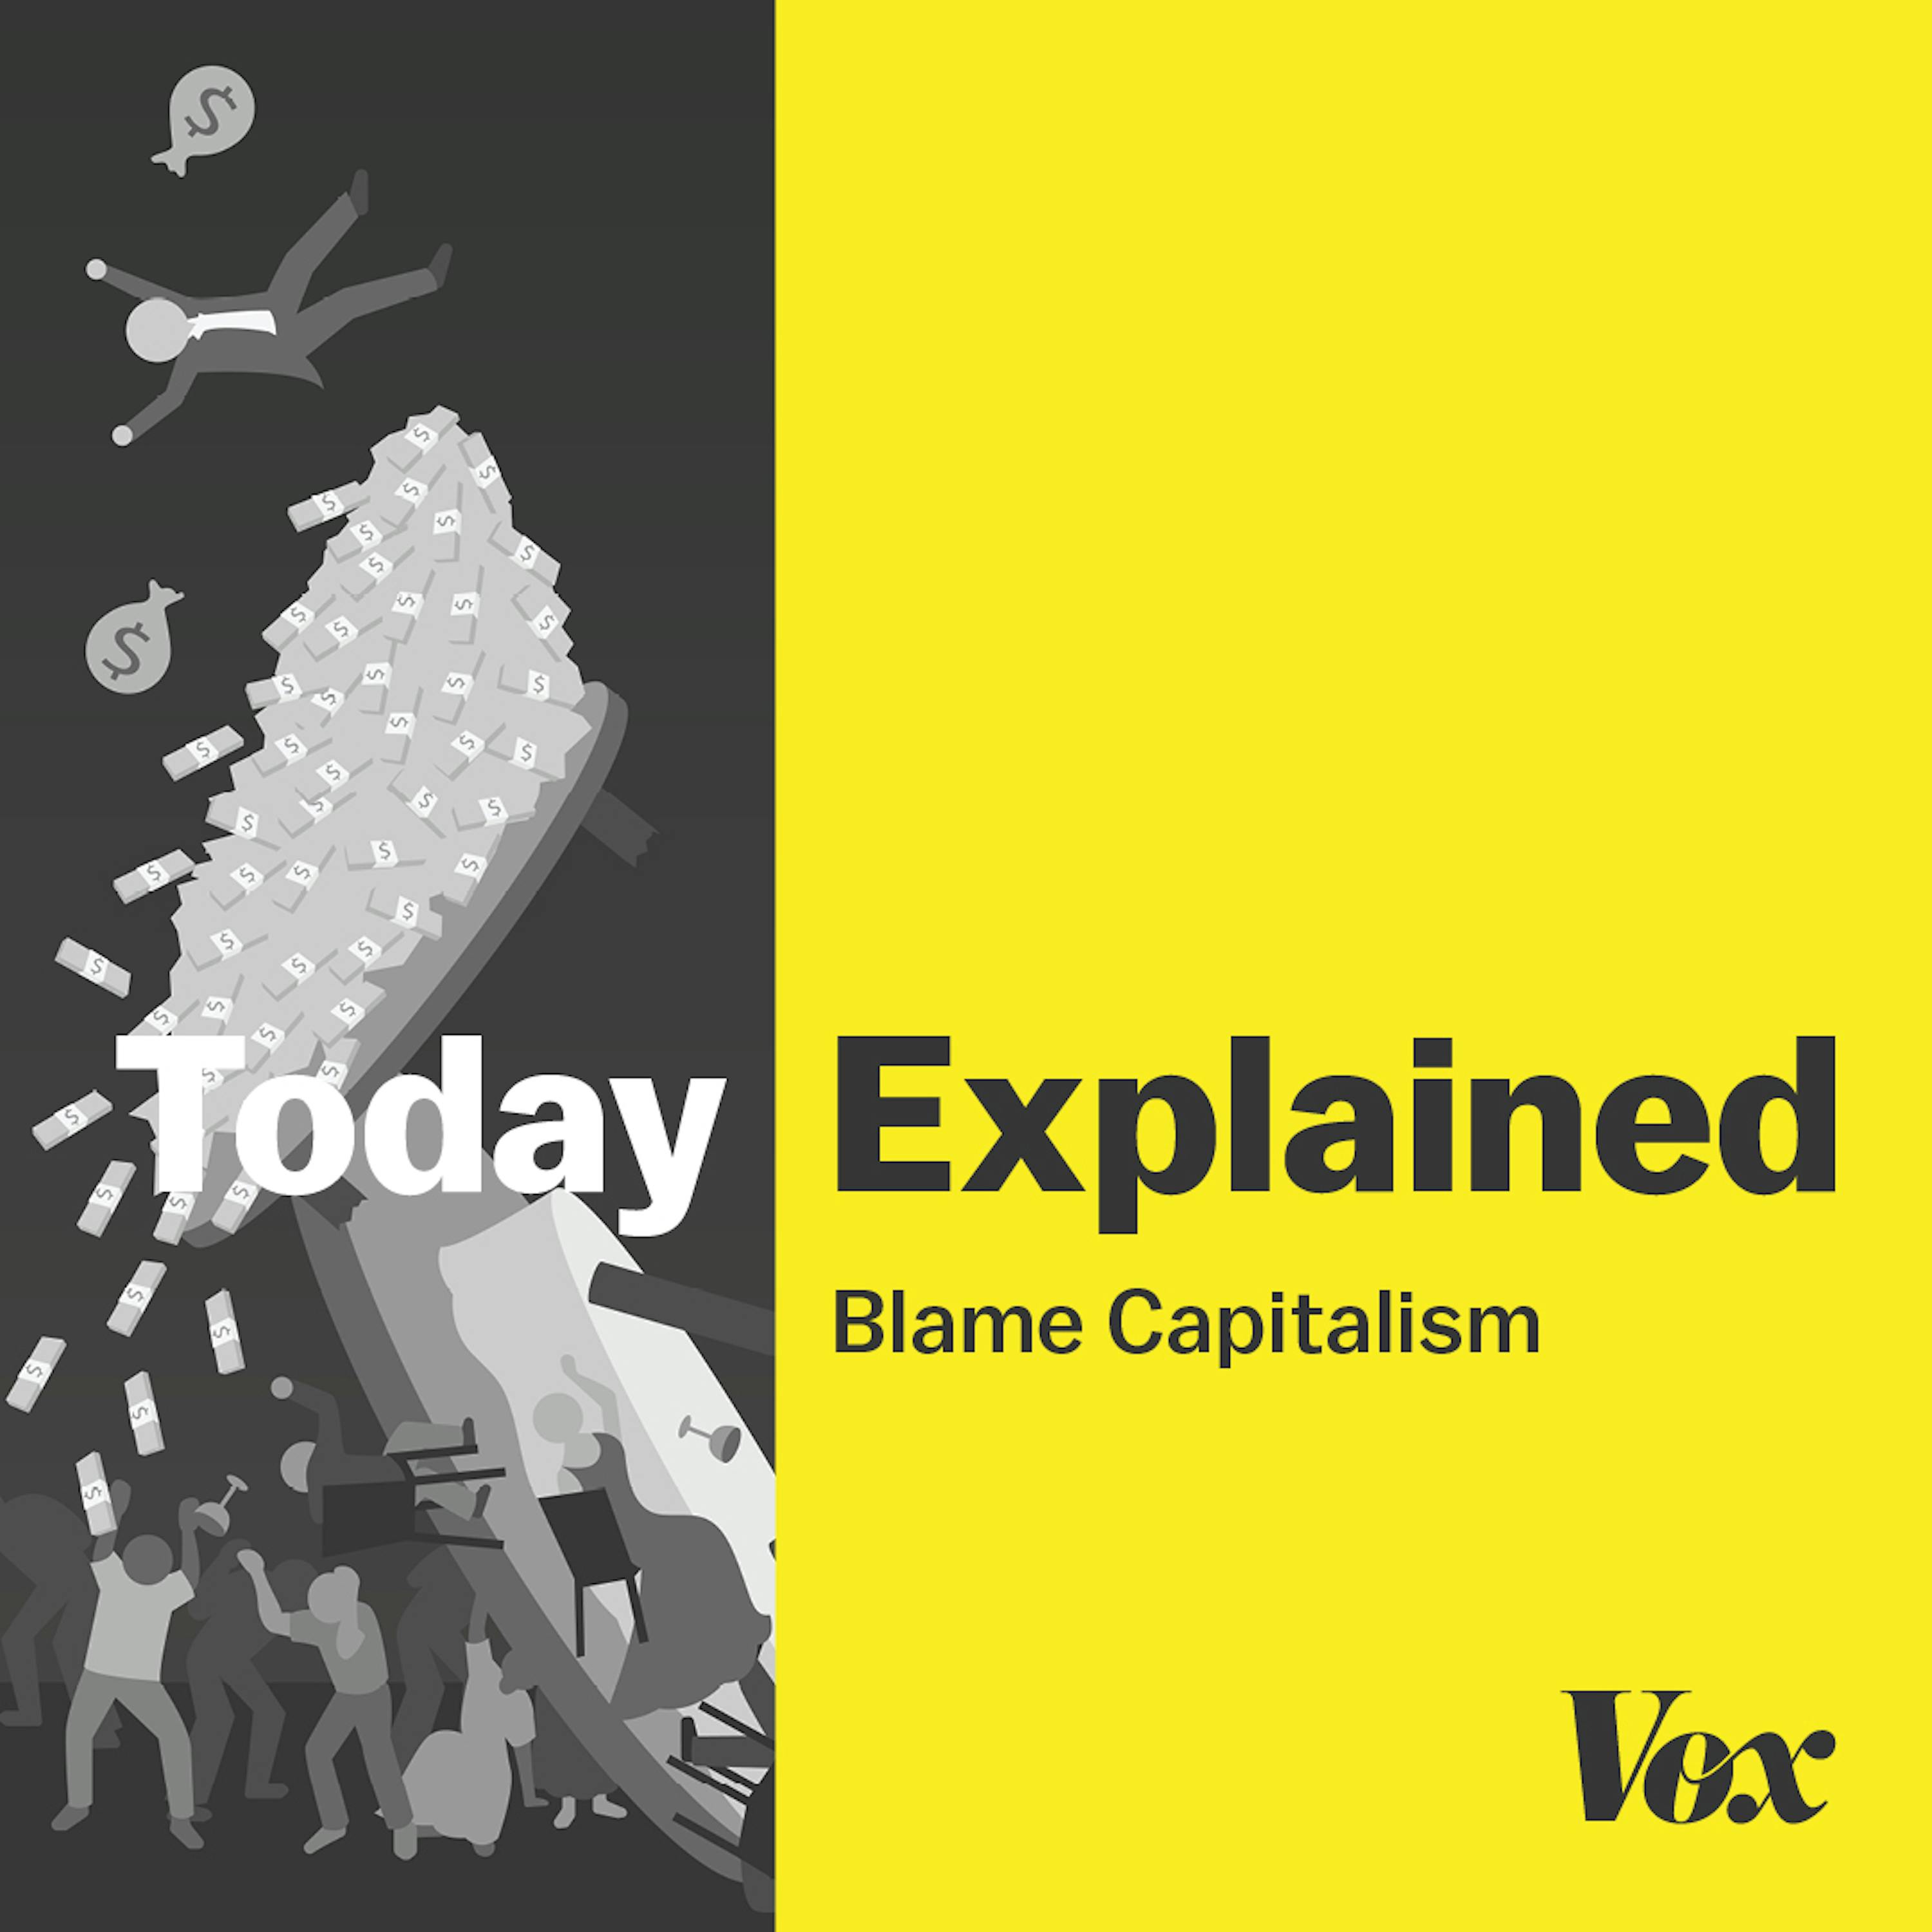 Blame Capitalism: Degrowing pains